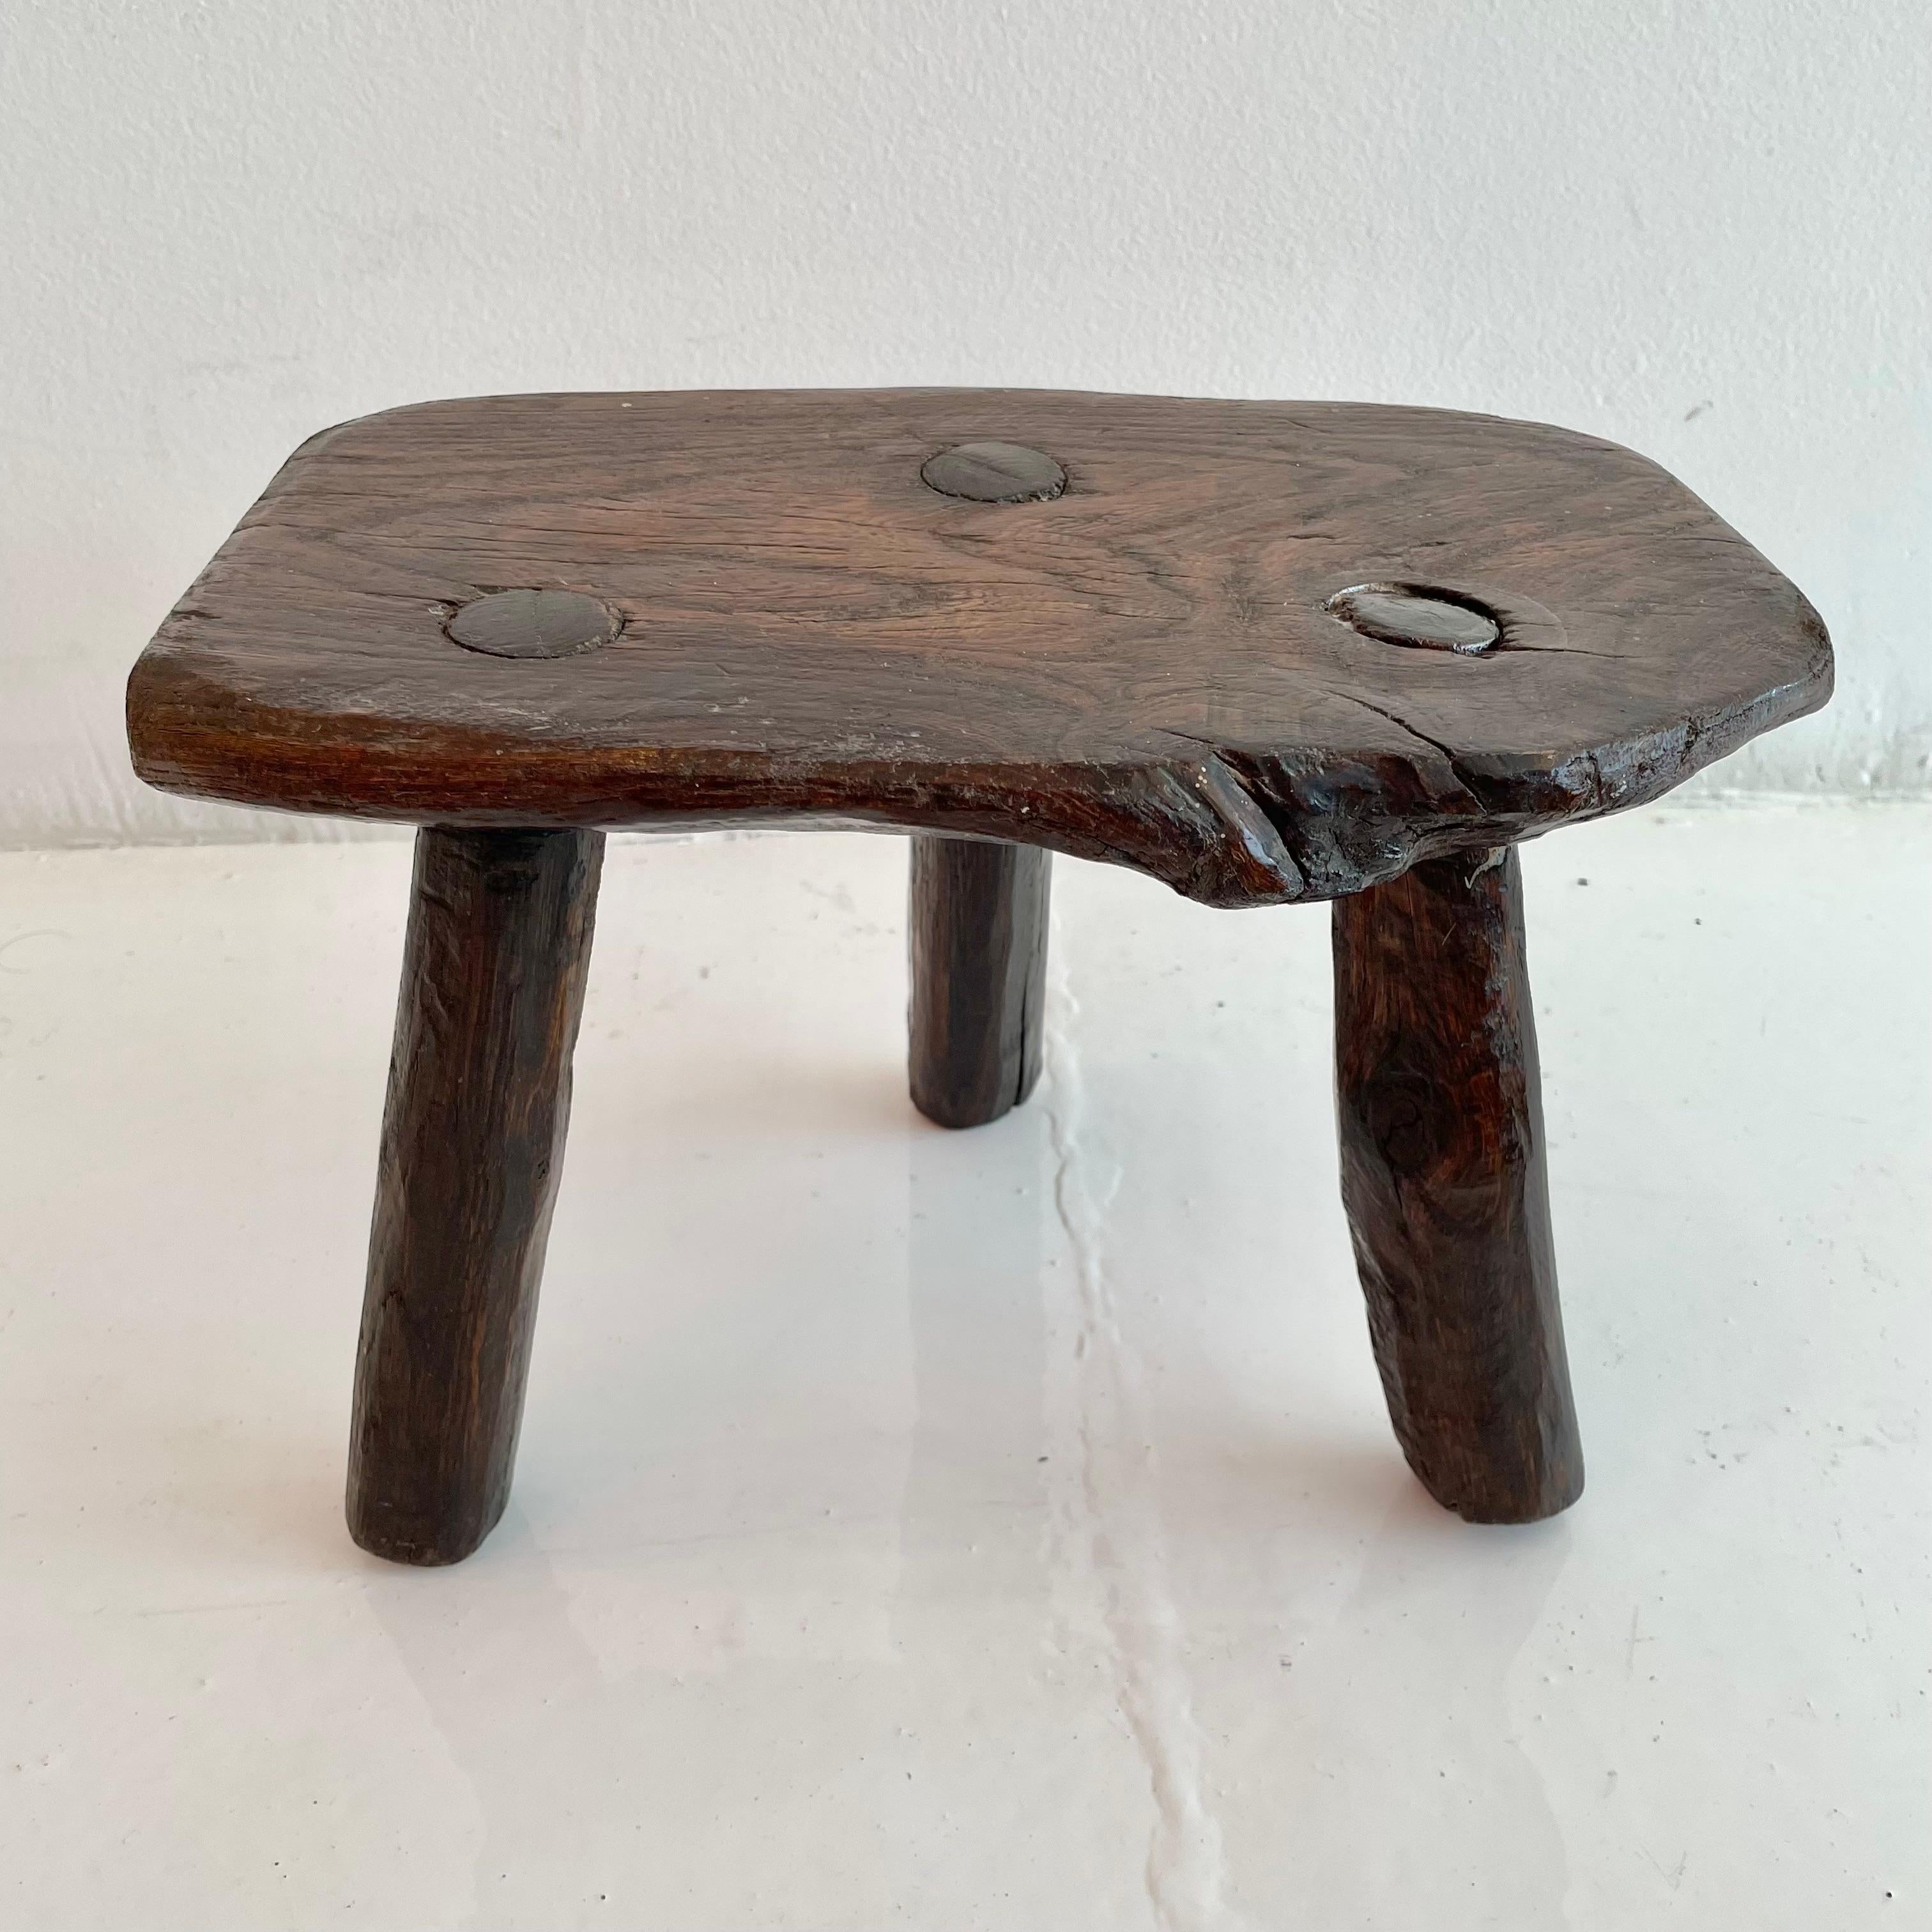 Stubby wooden tripod stool, made in France, circa 1950s. Thick brutalist seat with three rounded legs. No nails or hardware. Great shape and character. Petite stool with beautiful presence. Great vintage condition. Perfect for books or objects as